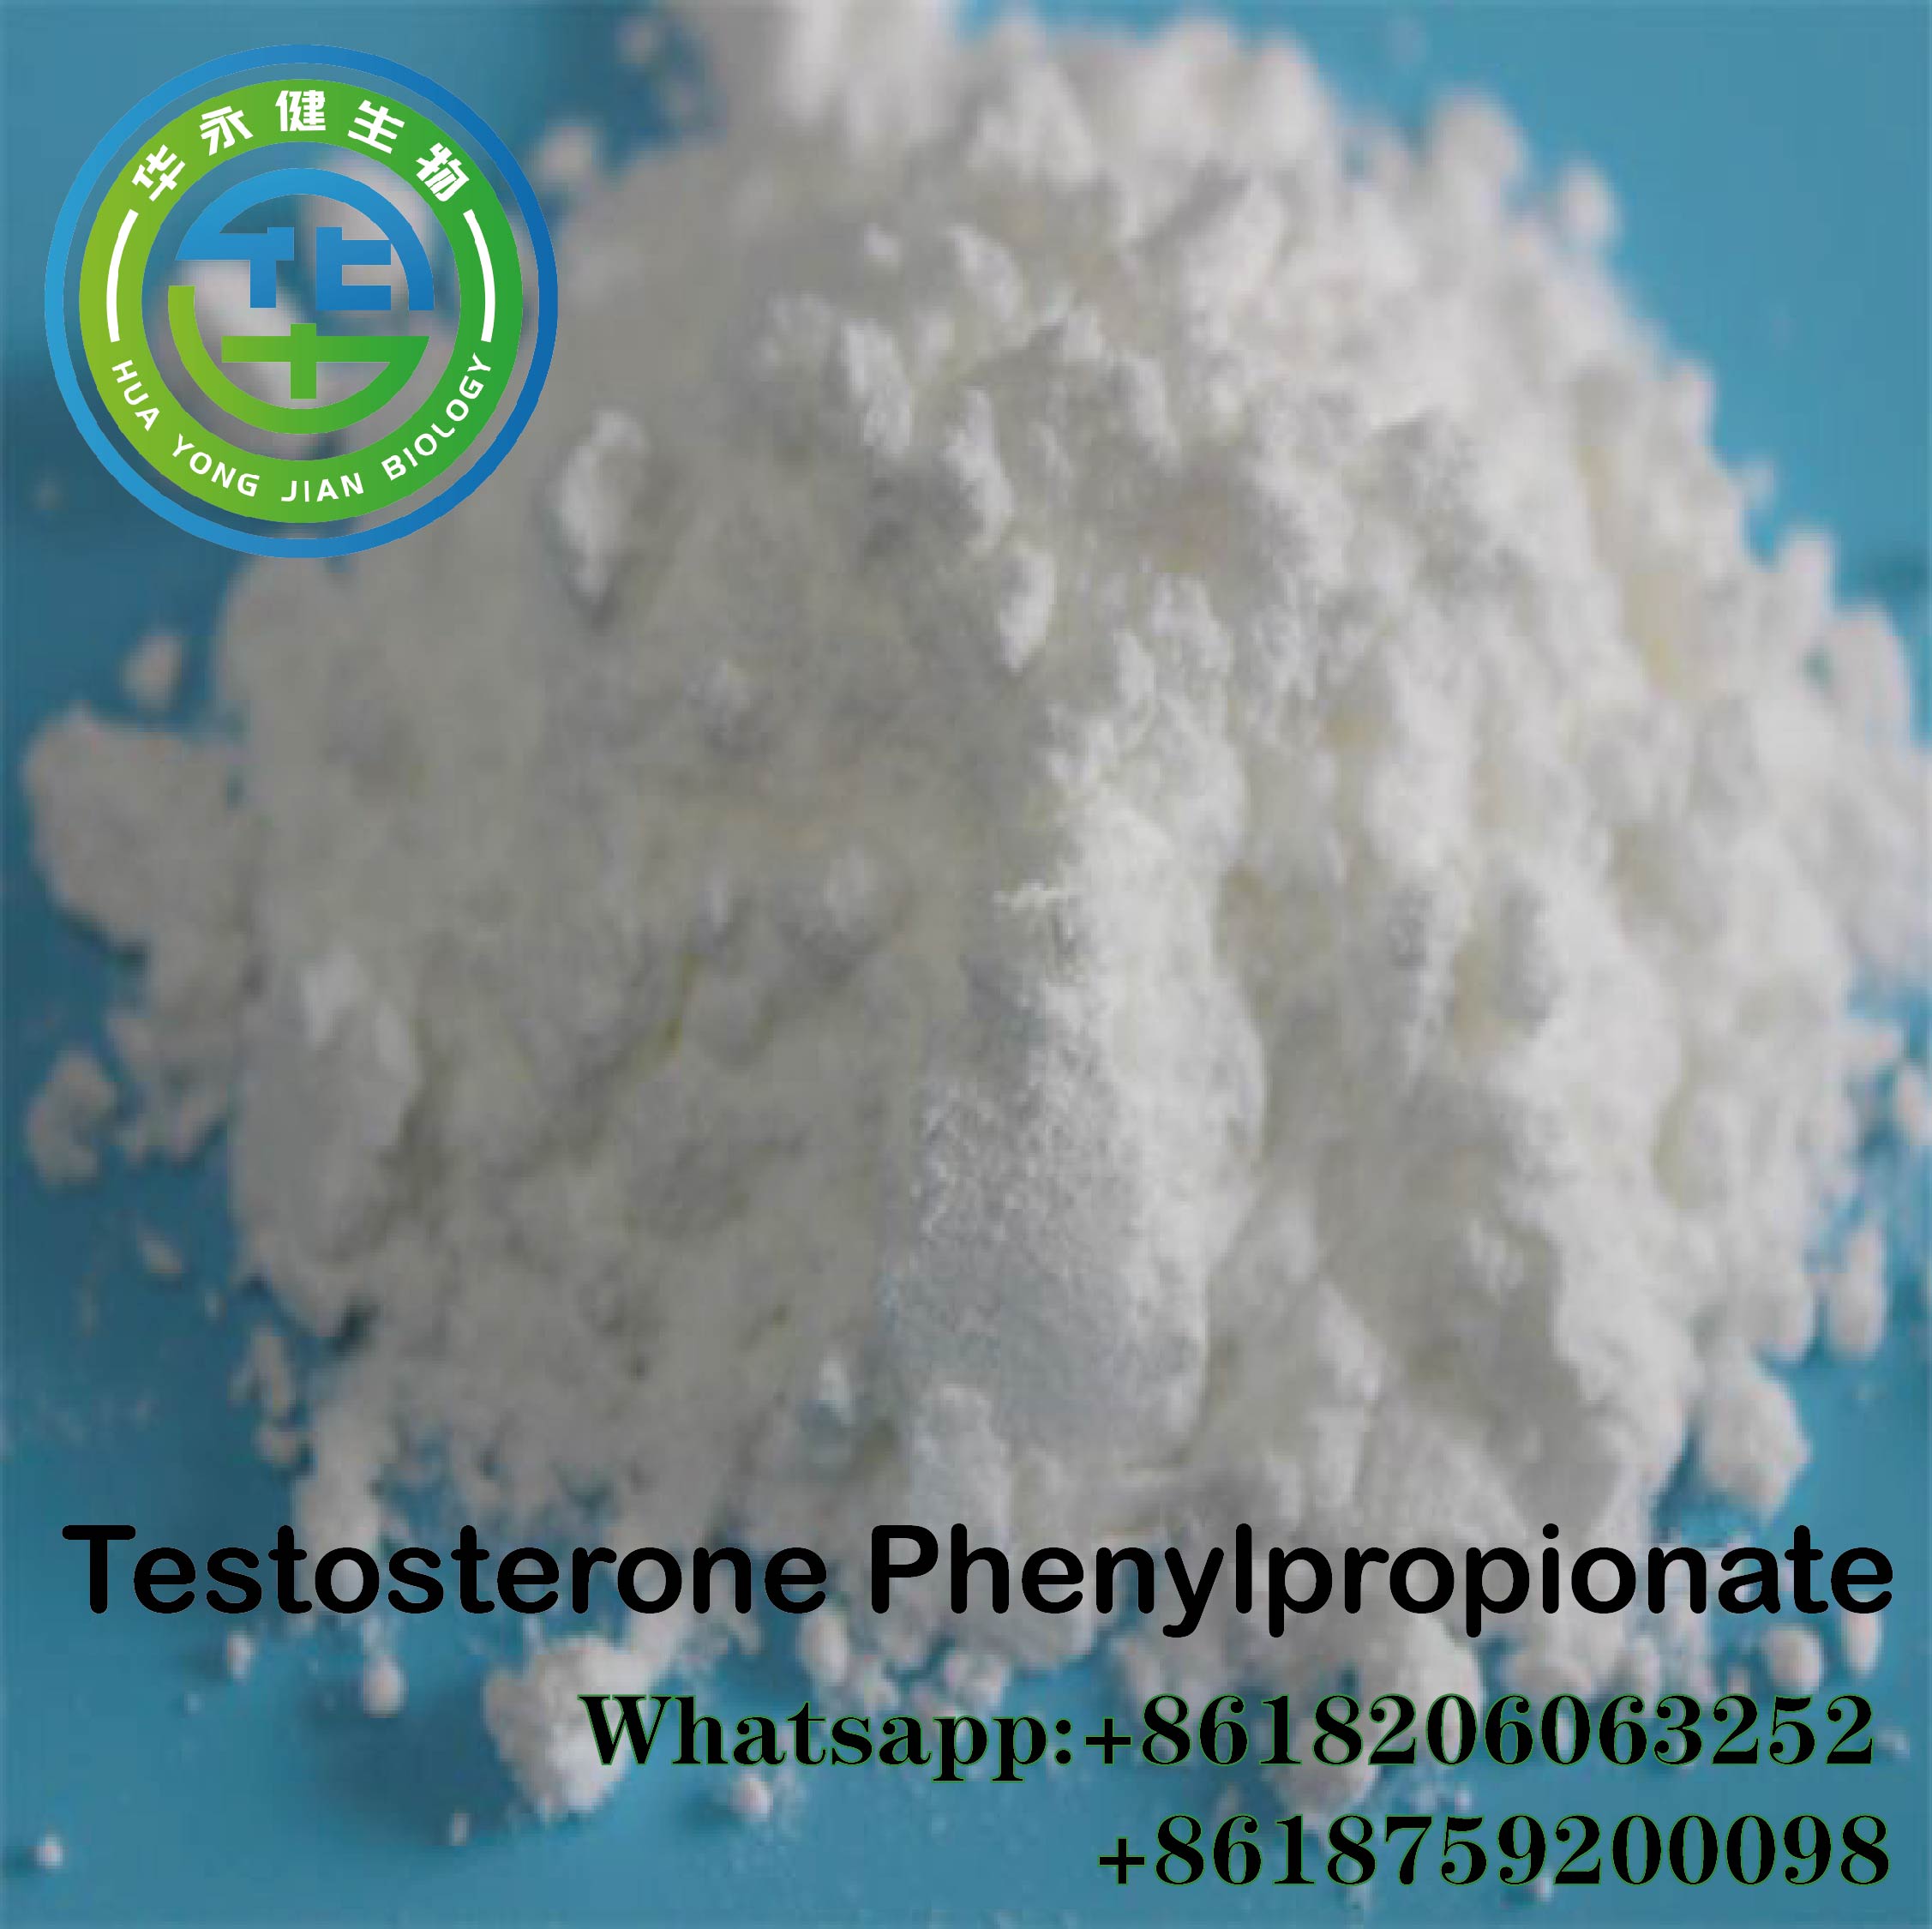 Testosterone Phenylpropinate Weight Loss Test Phen Testosterone Anabolic Steroid Test Phenylpropionate Powder CasNO.1255-49-8 